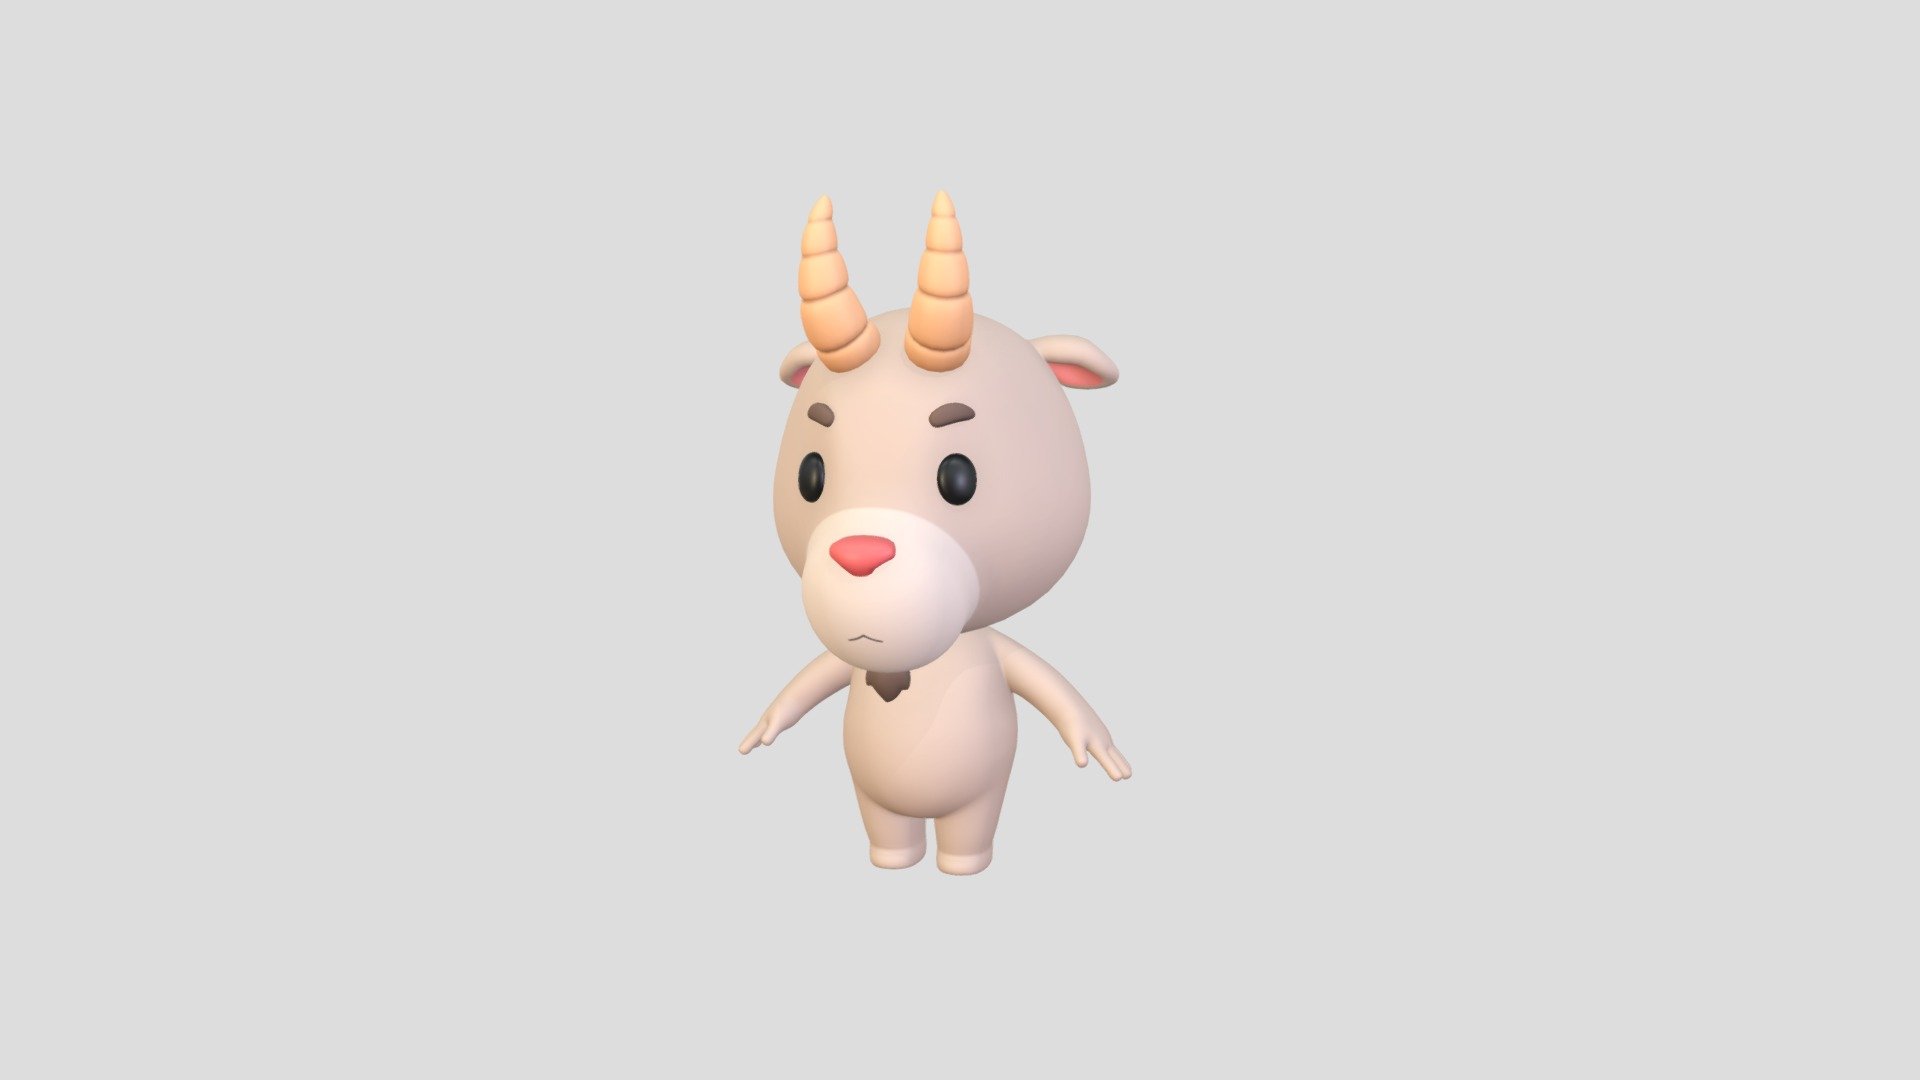 Goat Character 3d model.      
    


File Format      
 
- 3ds max 2022  
 
- FBX  
 
- OBJ  
    


Clean topology    

No Rig   

Non-overlapping unwrapped UVs        
 


PNG texture               

2048x2048                


- Base Color                        

- Normal                            

- Roughness                         



3,517 polygons                          

3,590 vertexs                          
 - Character166 Goat - Buy Royalty Free 3D model by BaluCG 3d model